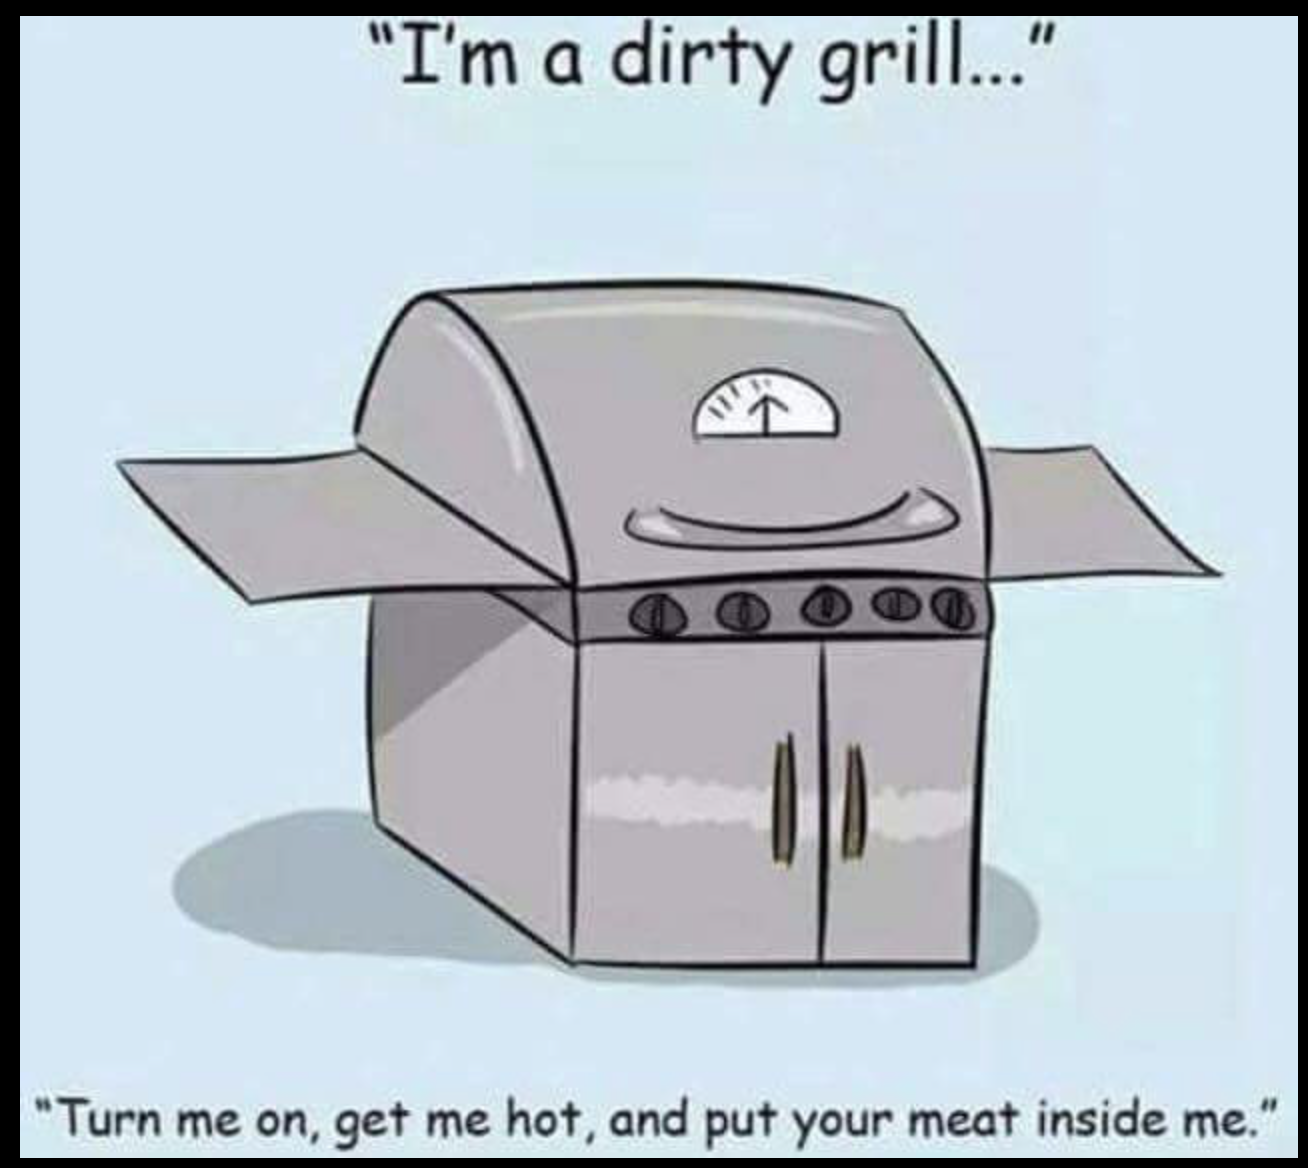 inappropriate memes for boyfriend - "I'm a dirty grill..." Ocd "Turn me on, get me hot, and put your meat inside me."